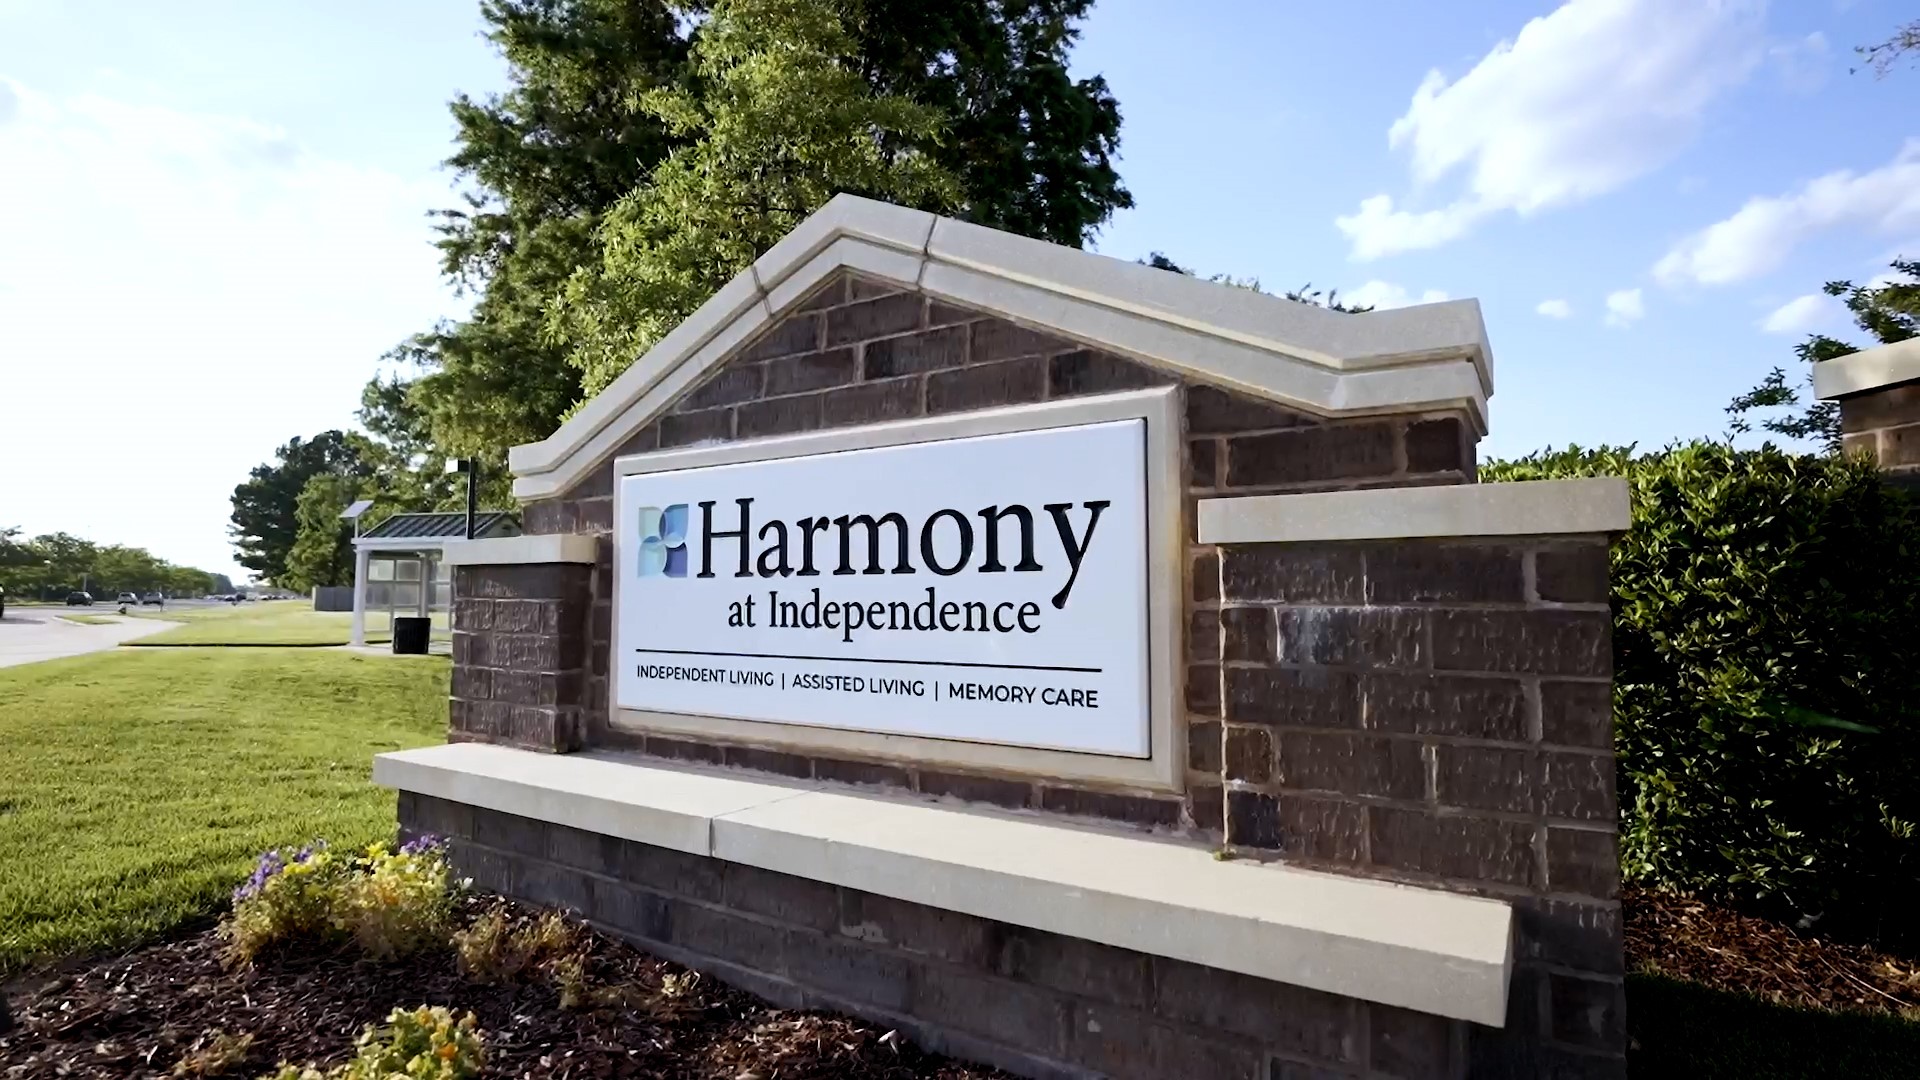 We sit down with the CEO of Harmony Senior Services, to dispel some of the myths people have about Senior Living communities.